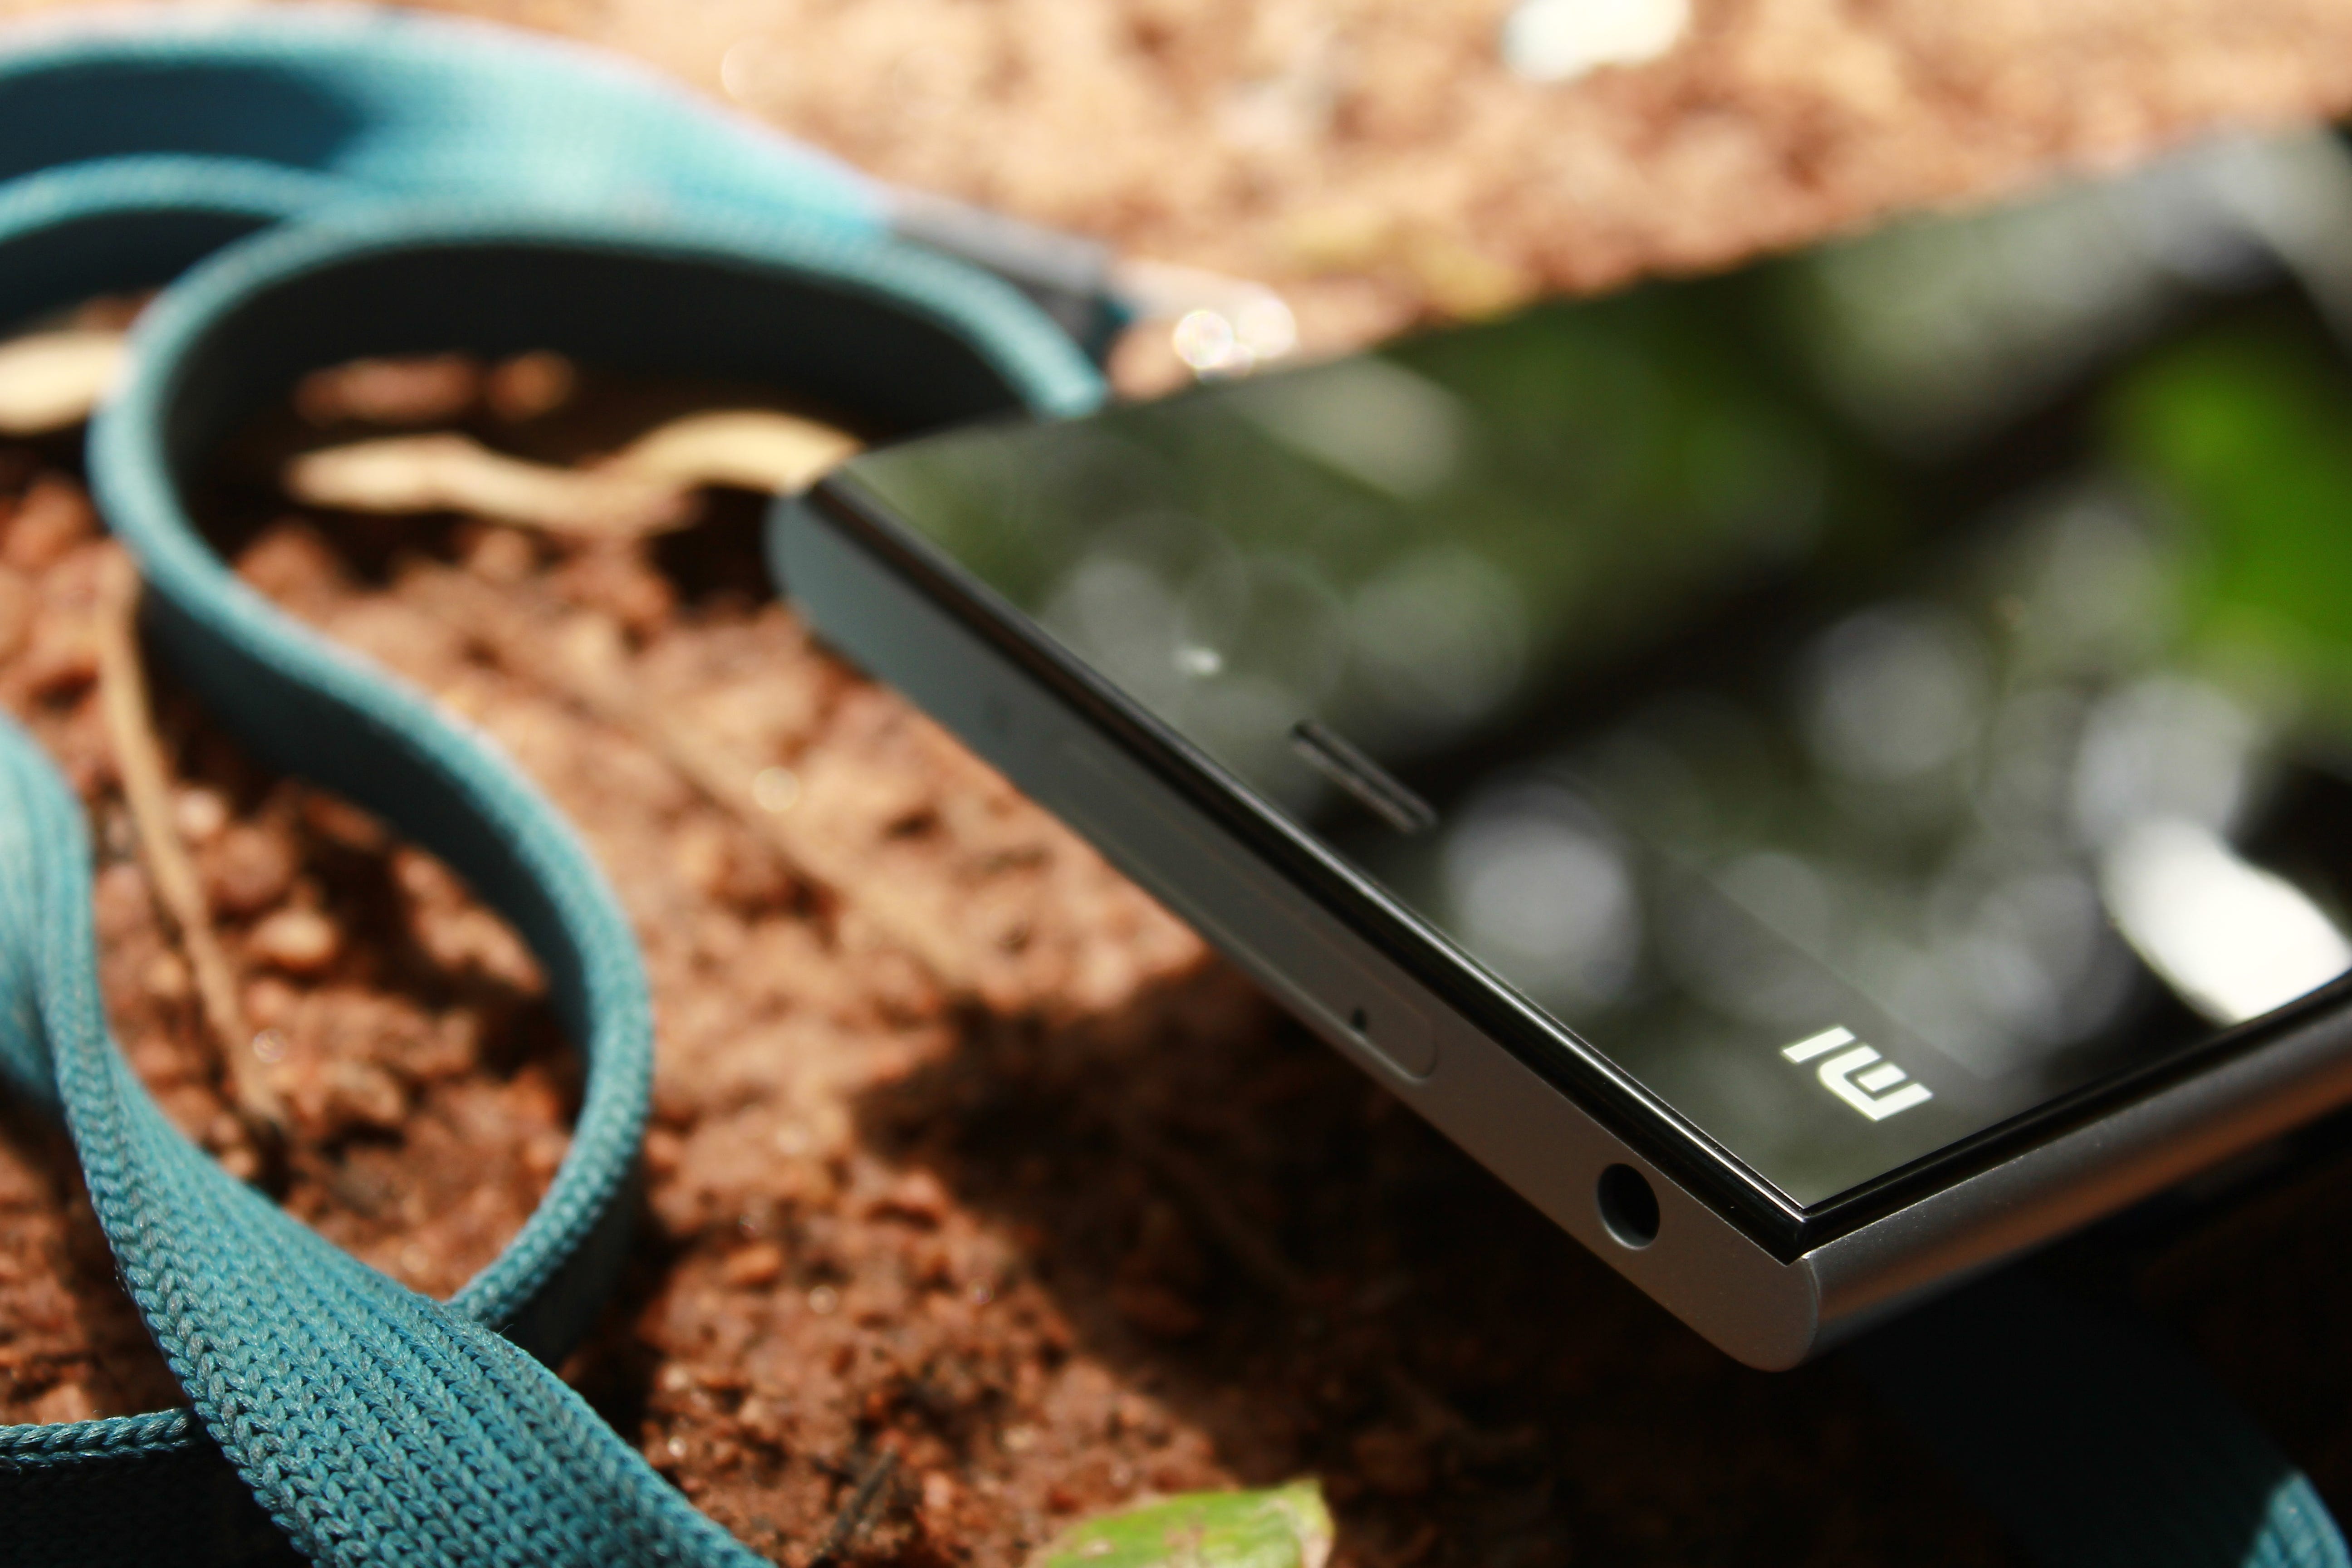 Xiaomi 11T Pro Unboxing & First Impressions: Makings of an All